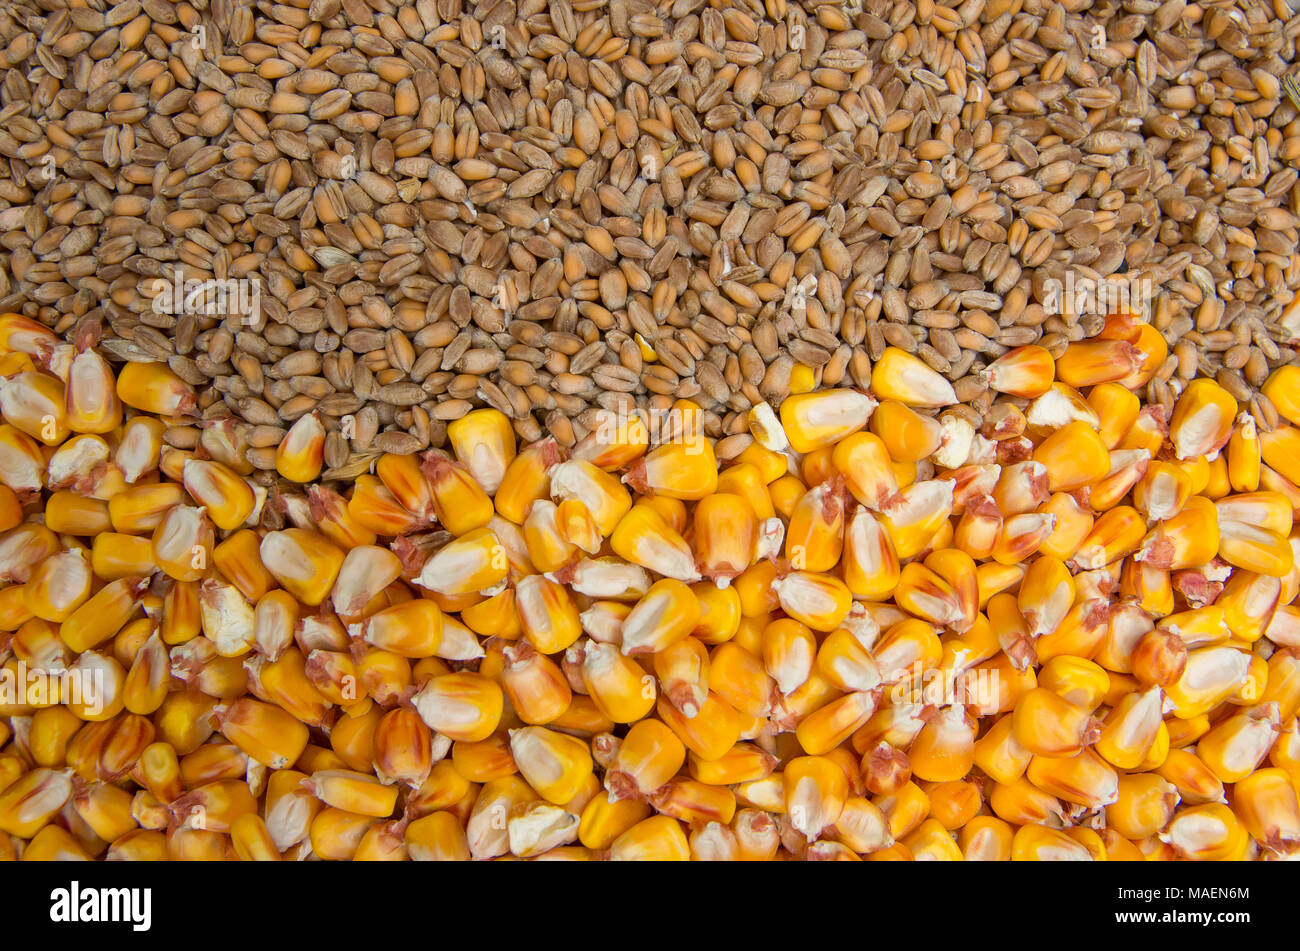 Cereals - wheat and corn Stock Photo